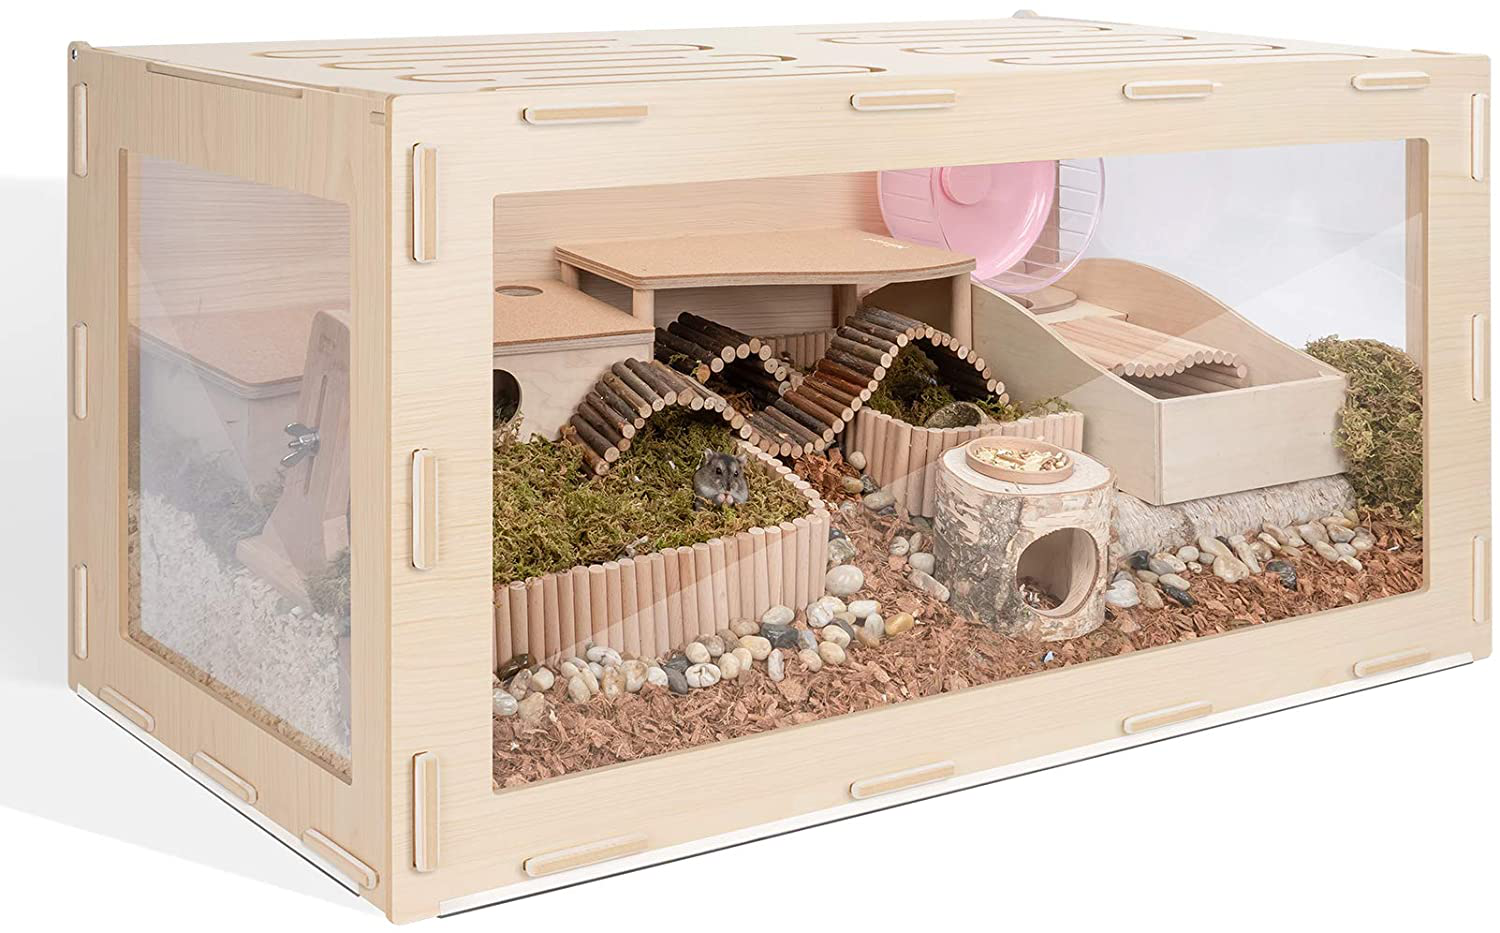 Niteangel Bigger World - MDF Aspen Small Animal Cage for Hamsters Degus Mices or Other Similar-Sized Pets